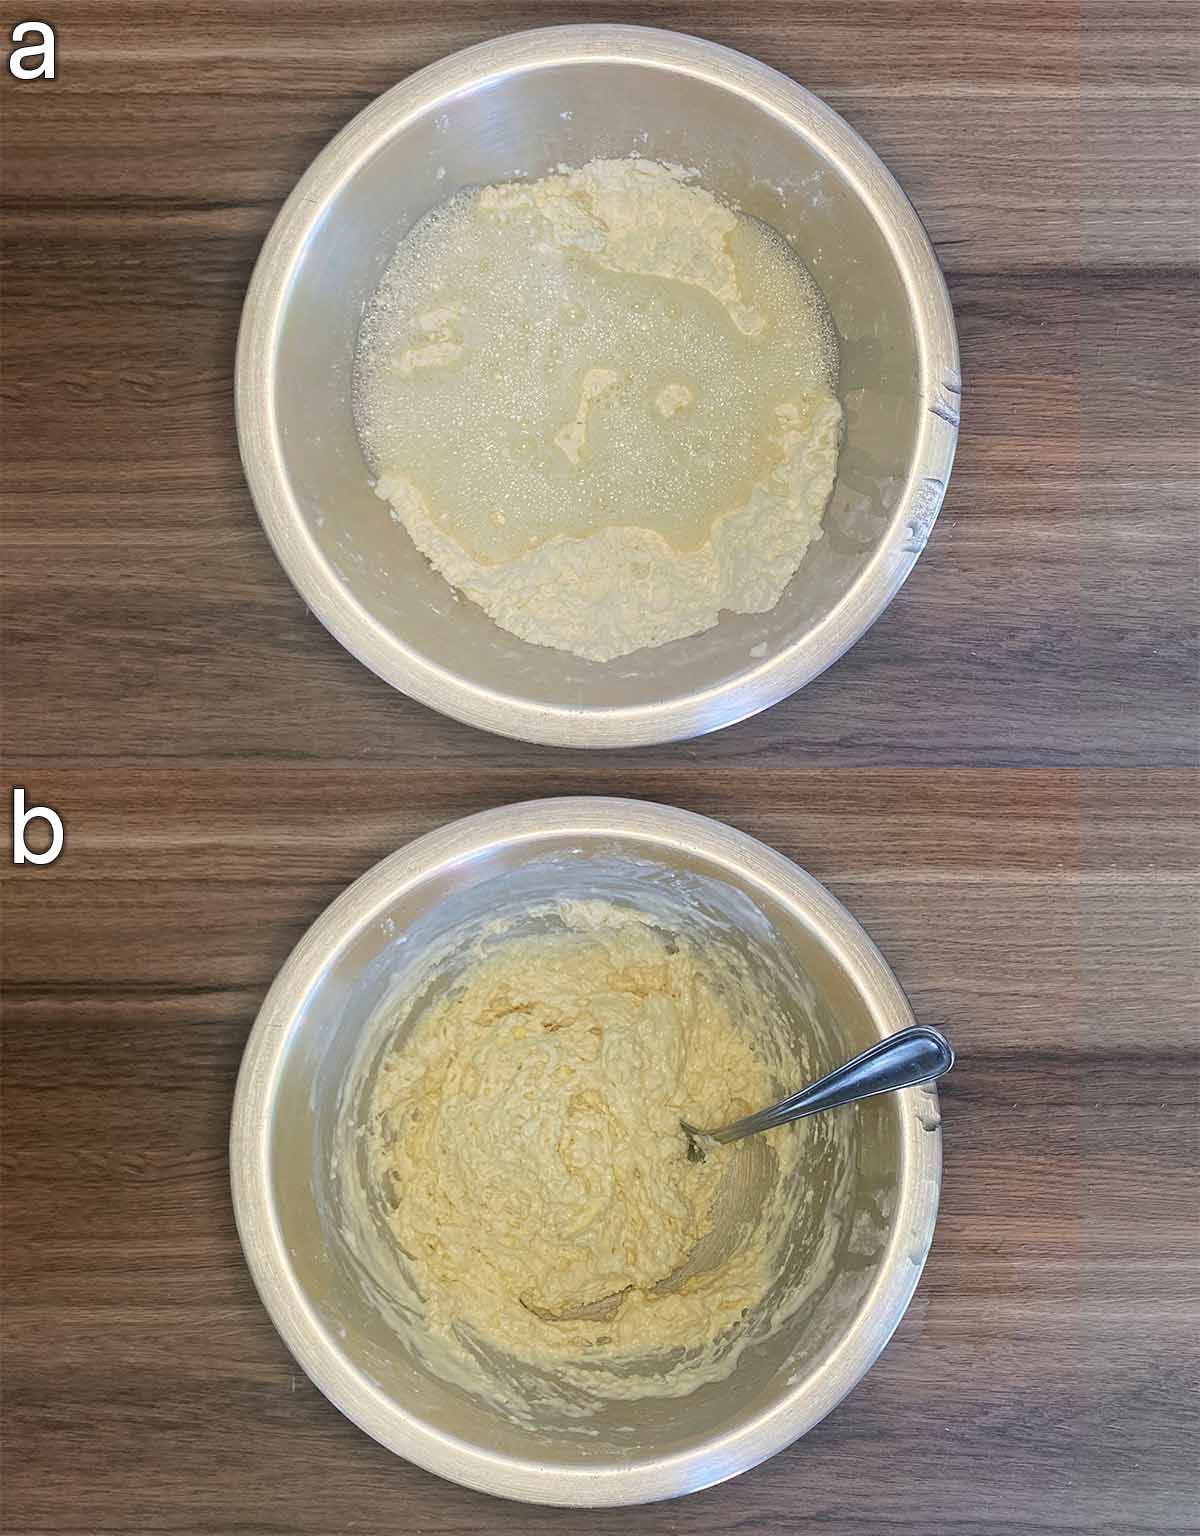 Two shot collage of lemonade added to the bowl, then mixed into the flour.